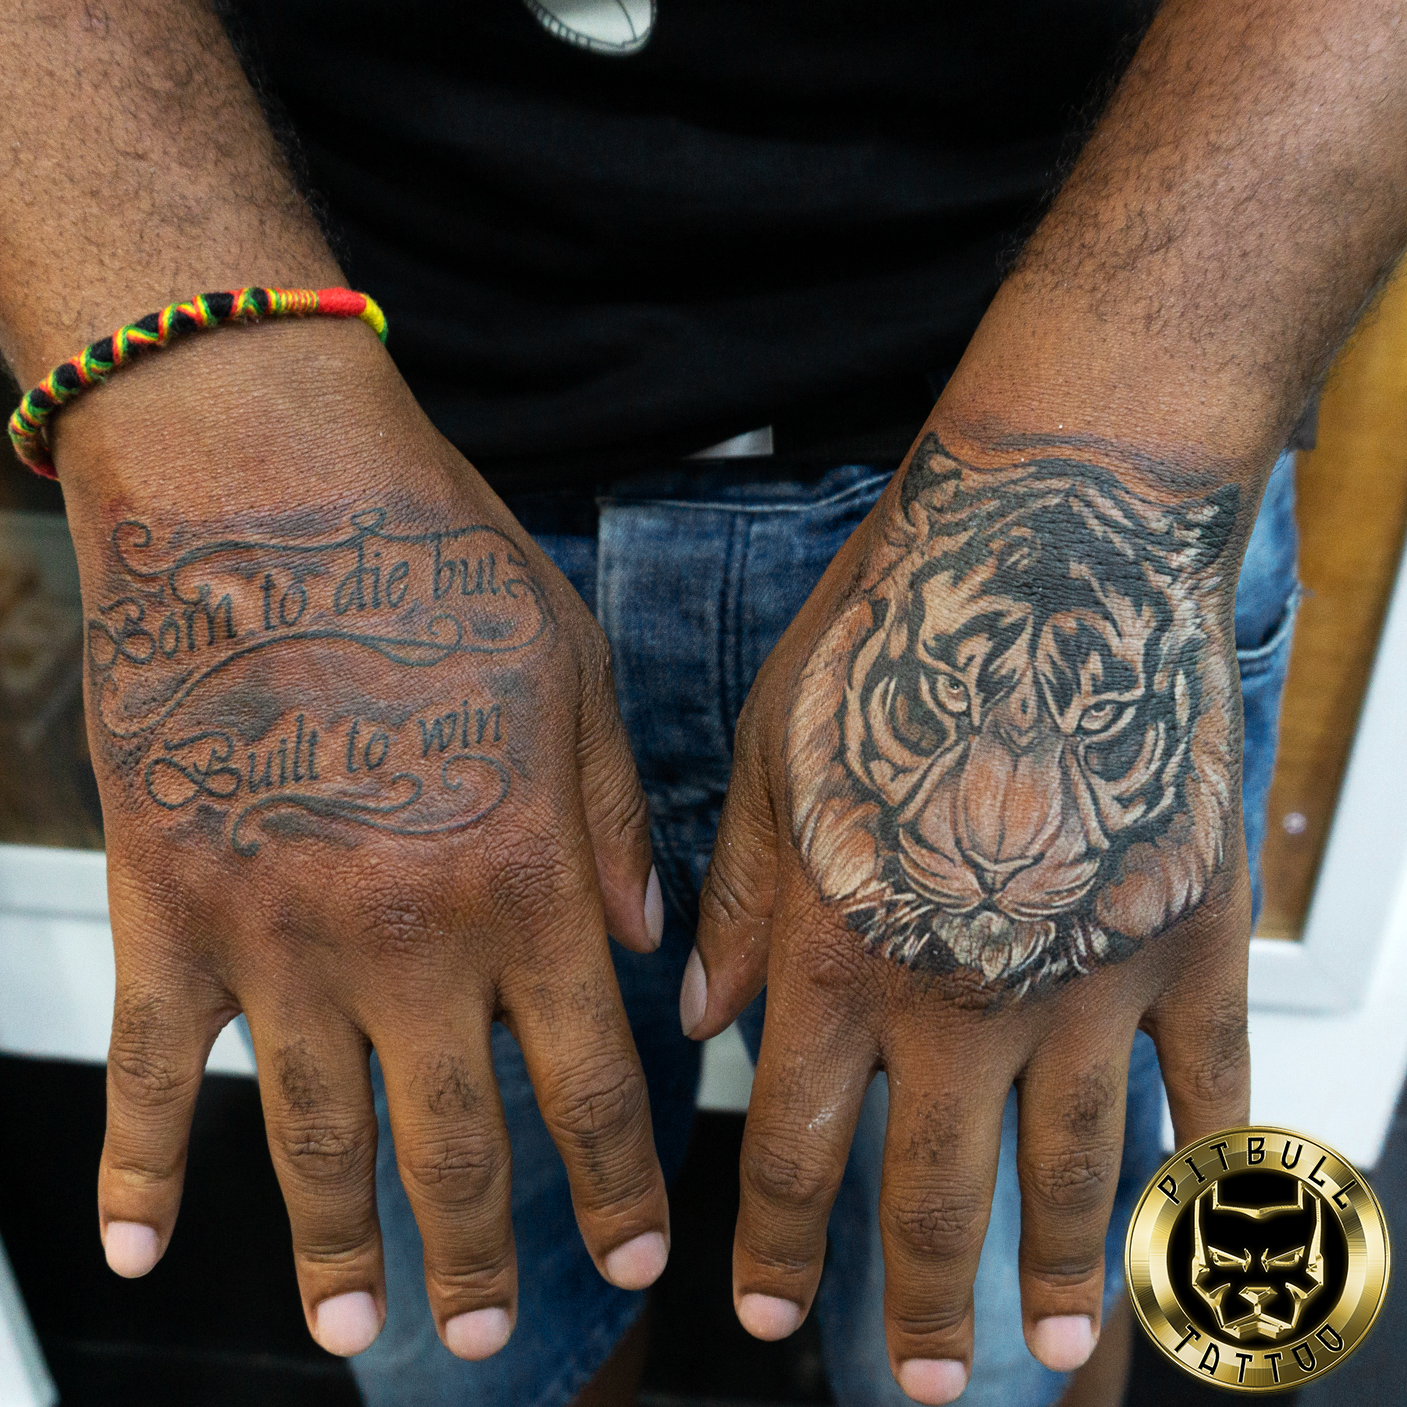 Yes Color Tattoos Do Look Good on Dark Skin  Skin color tattoos Dark skin  tattoo Purple tattoos